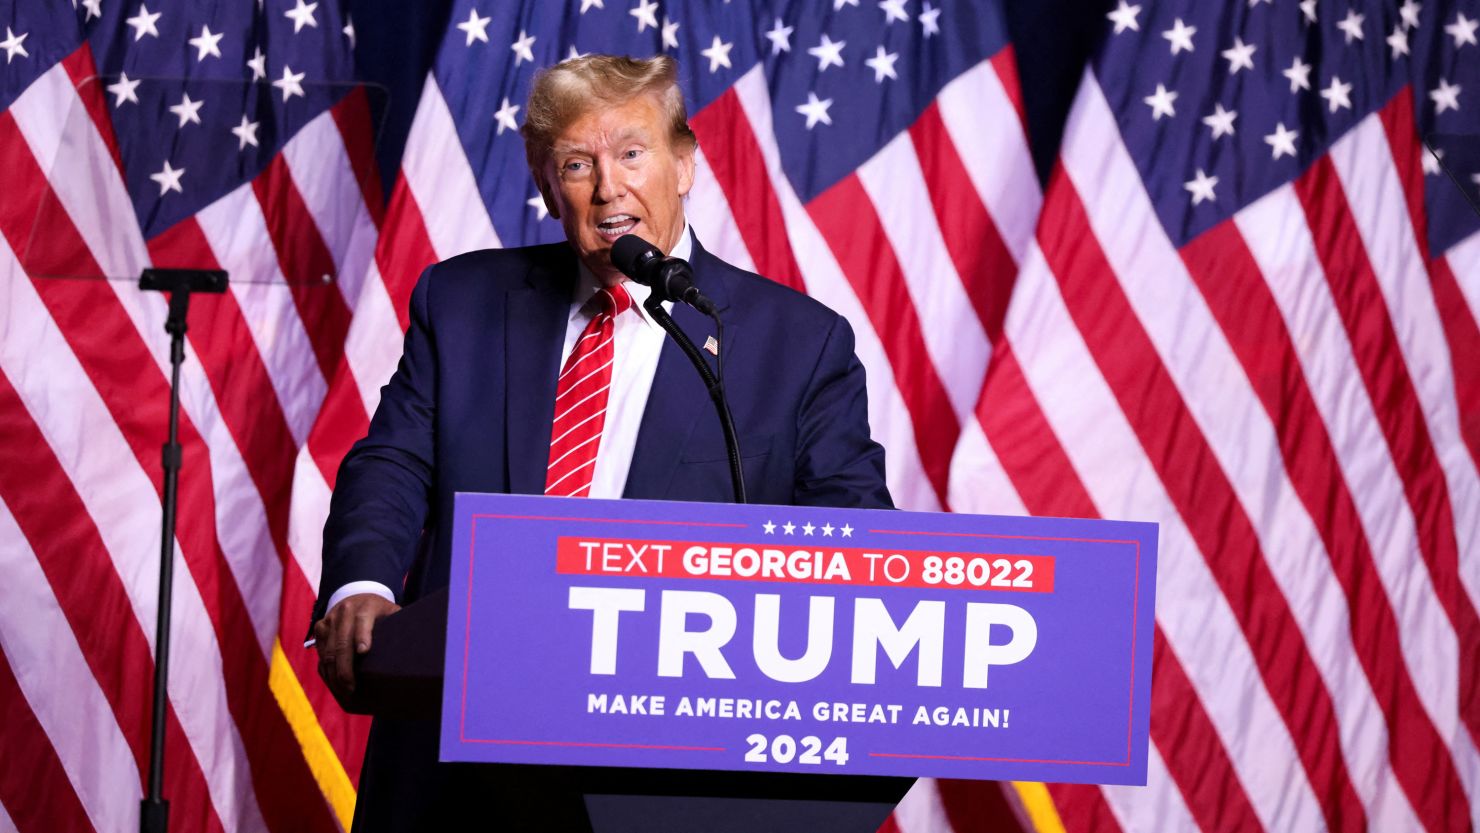 Republican presidential candidate and former US President Donald Trump speaks during a campaign rally at the Forum River Center in Rome, Georgia, on March 9, 2024.